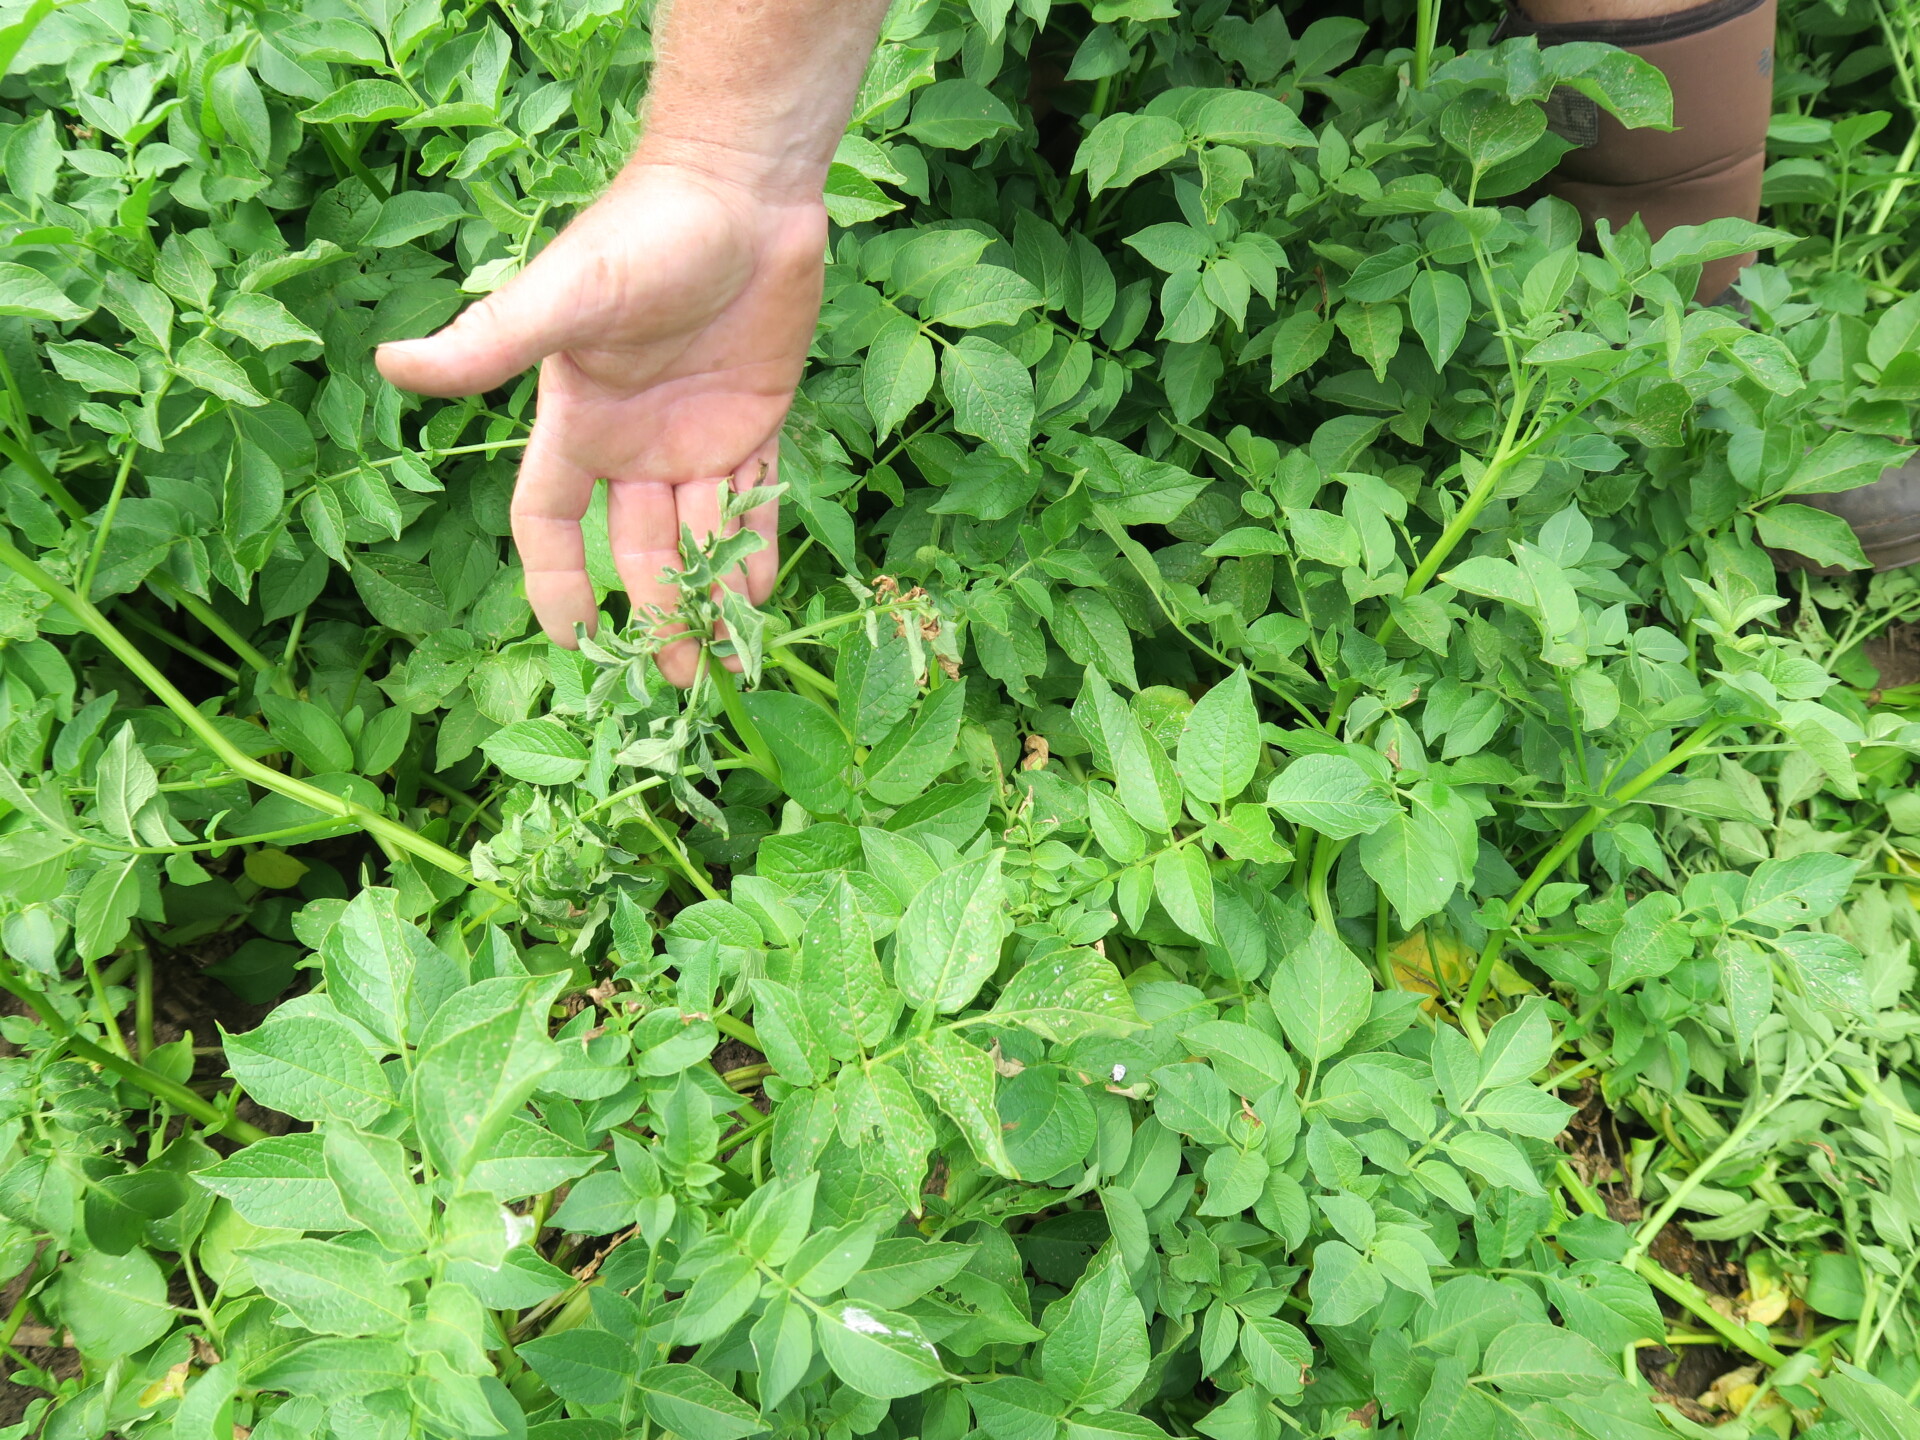 Figure 1.  Often the first symptom of black leg of potato that is noticed is a wilt.